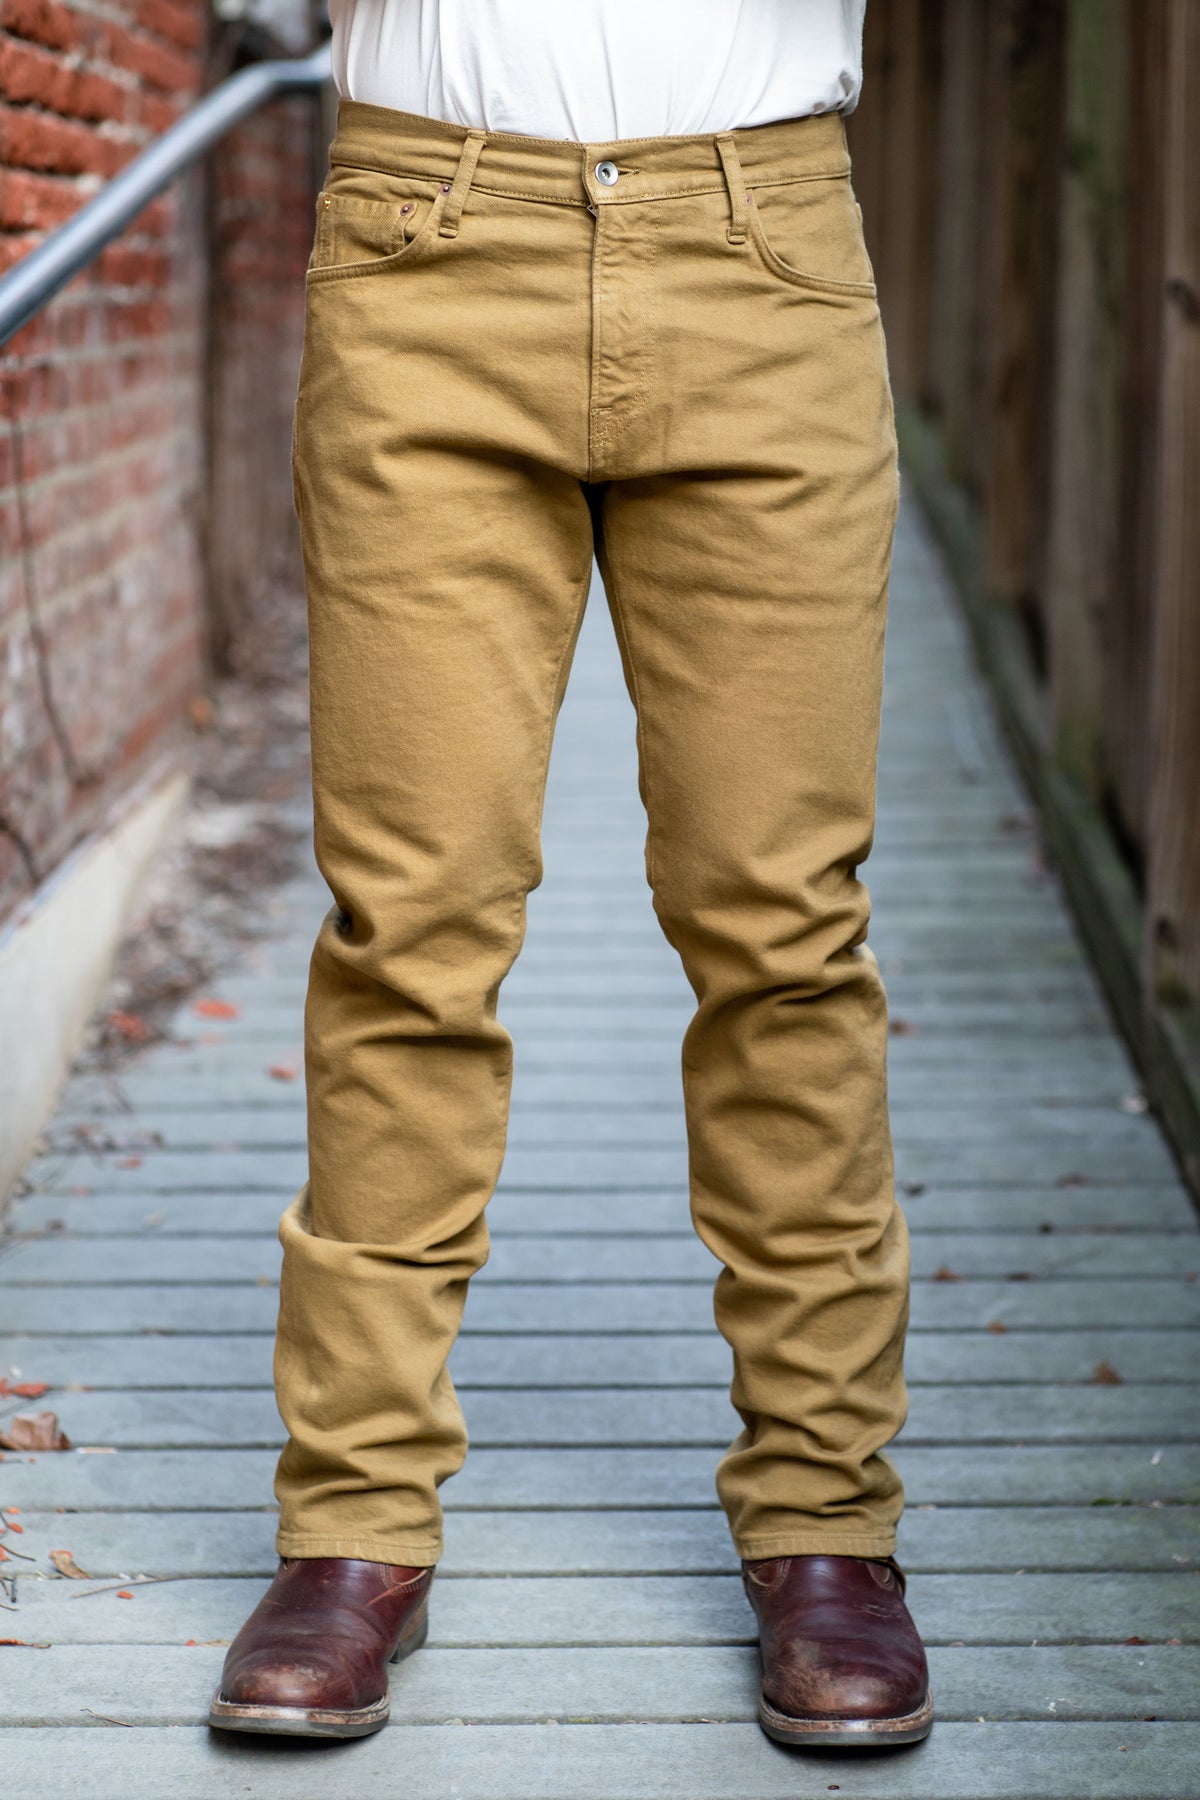 Jane Motorcycles Bedford Canvas Double Knee Pant - Tobacco